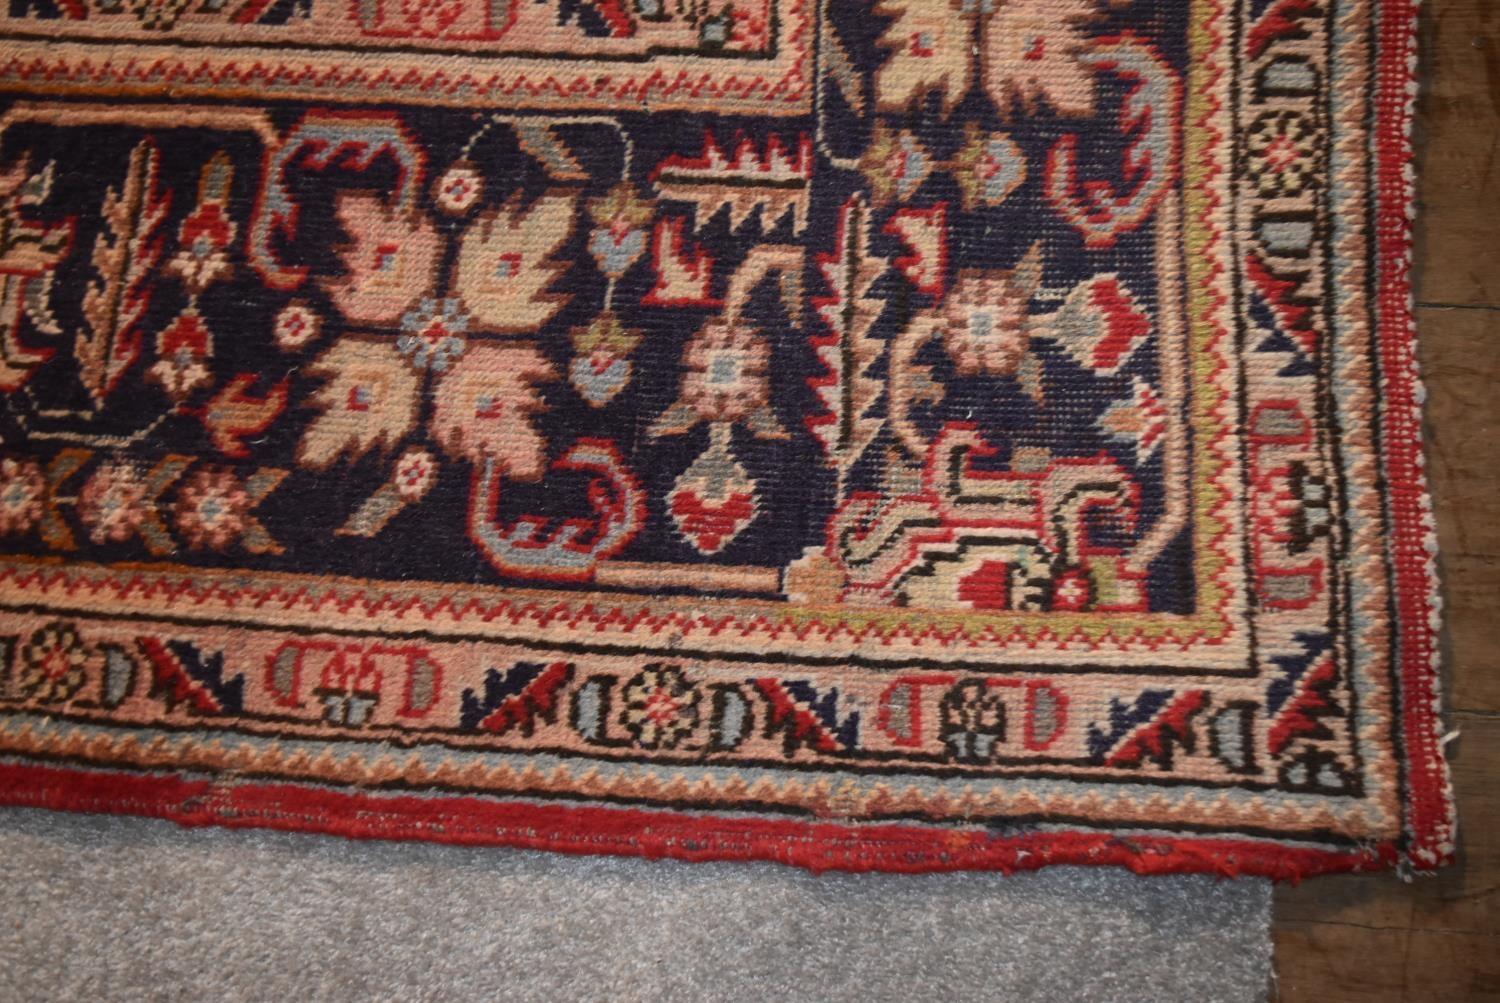 A Persian Tabriz carpet with floral central double pendant medallion surrounded by spandrels on a - Image 3 of 4